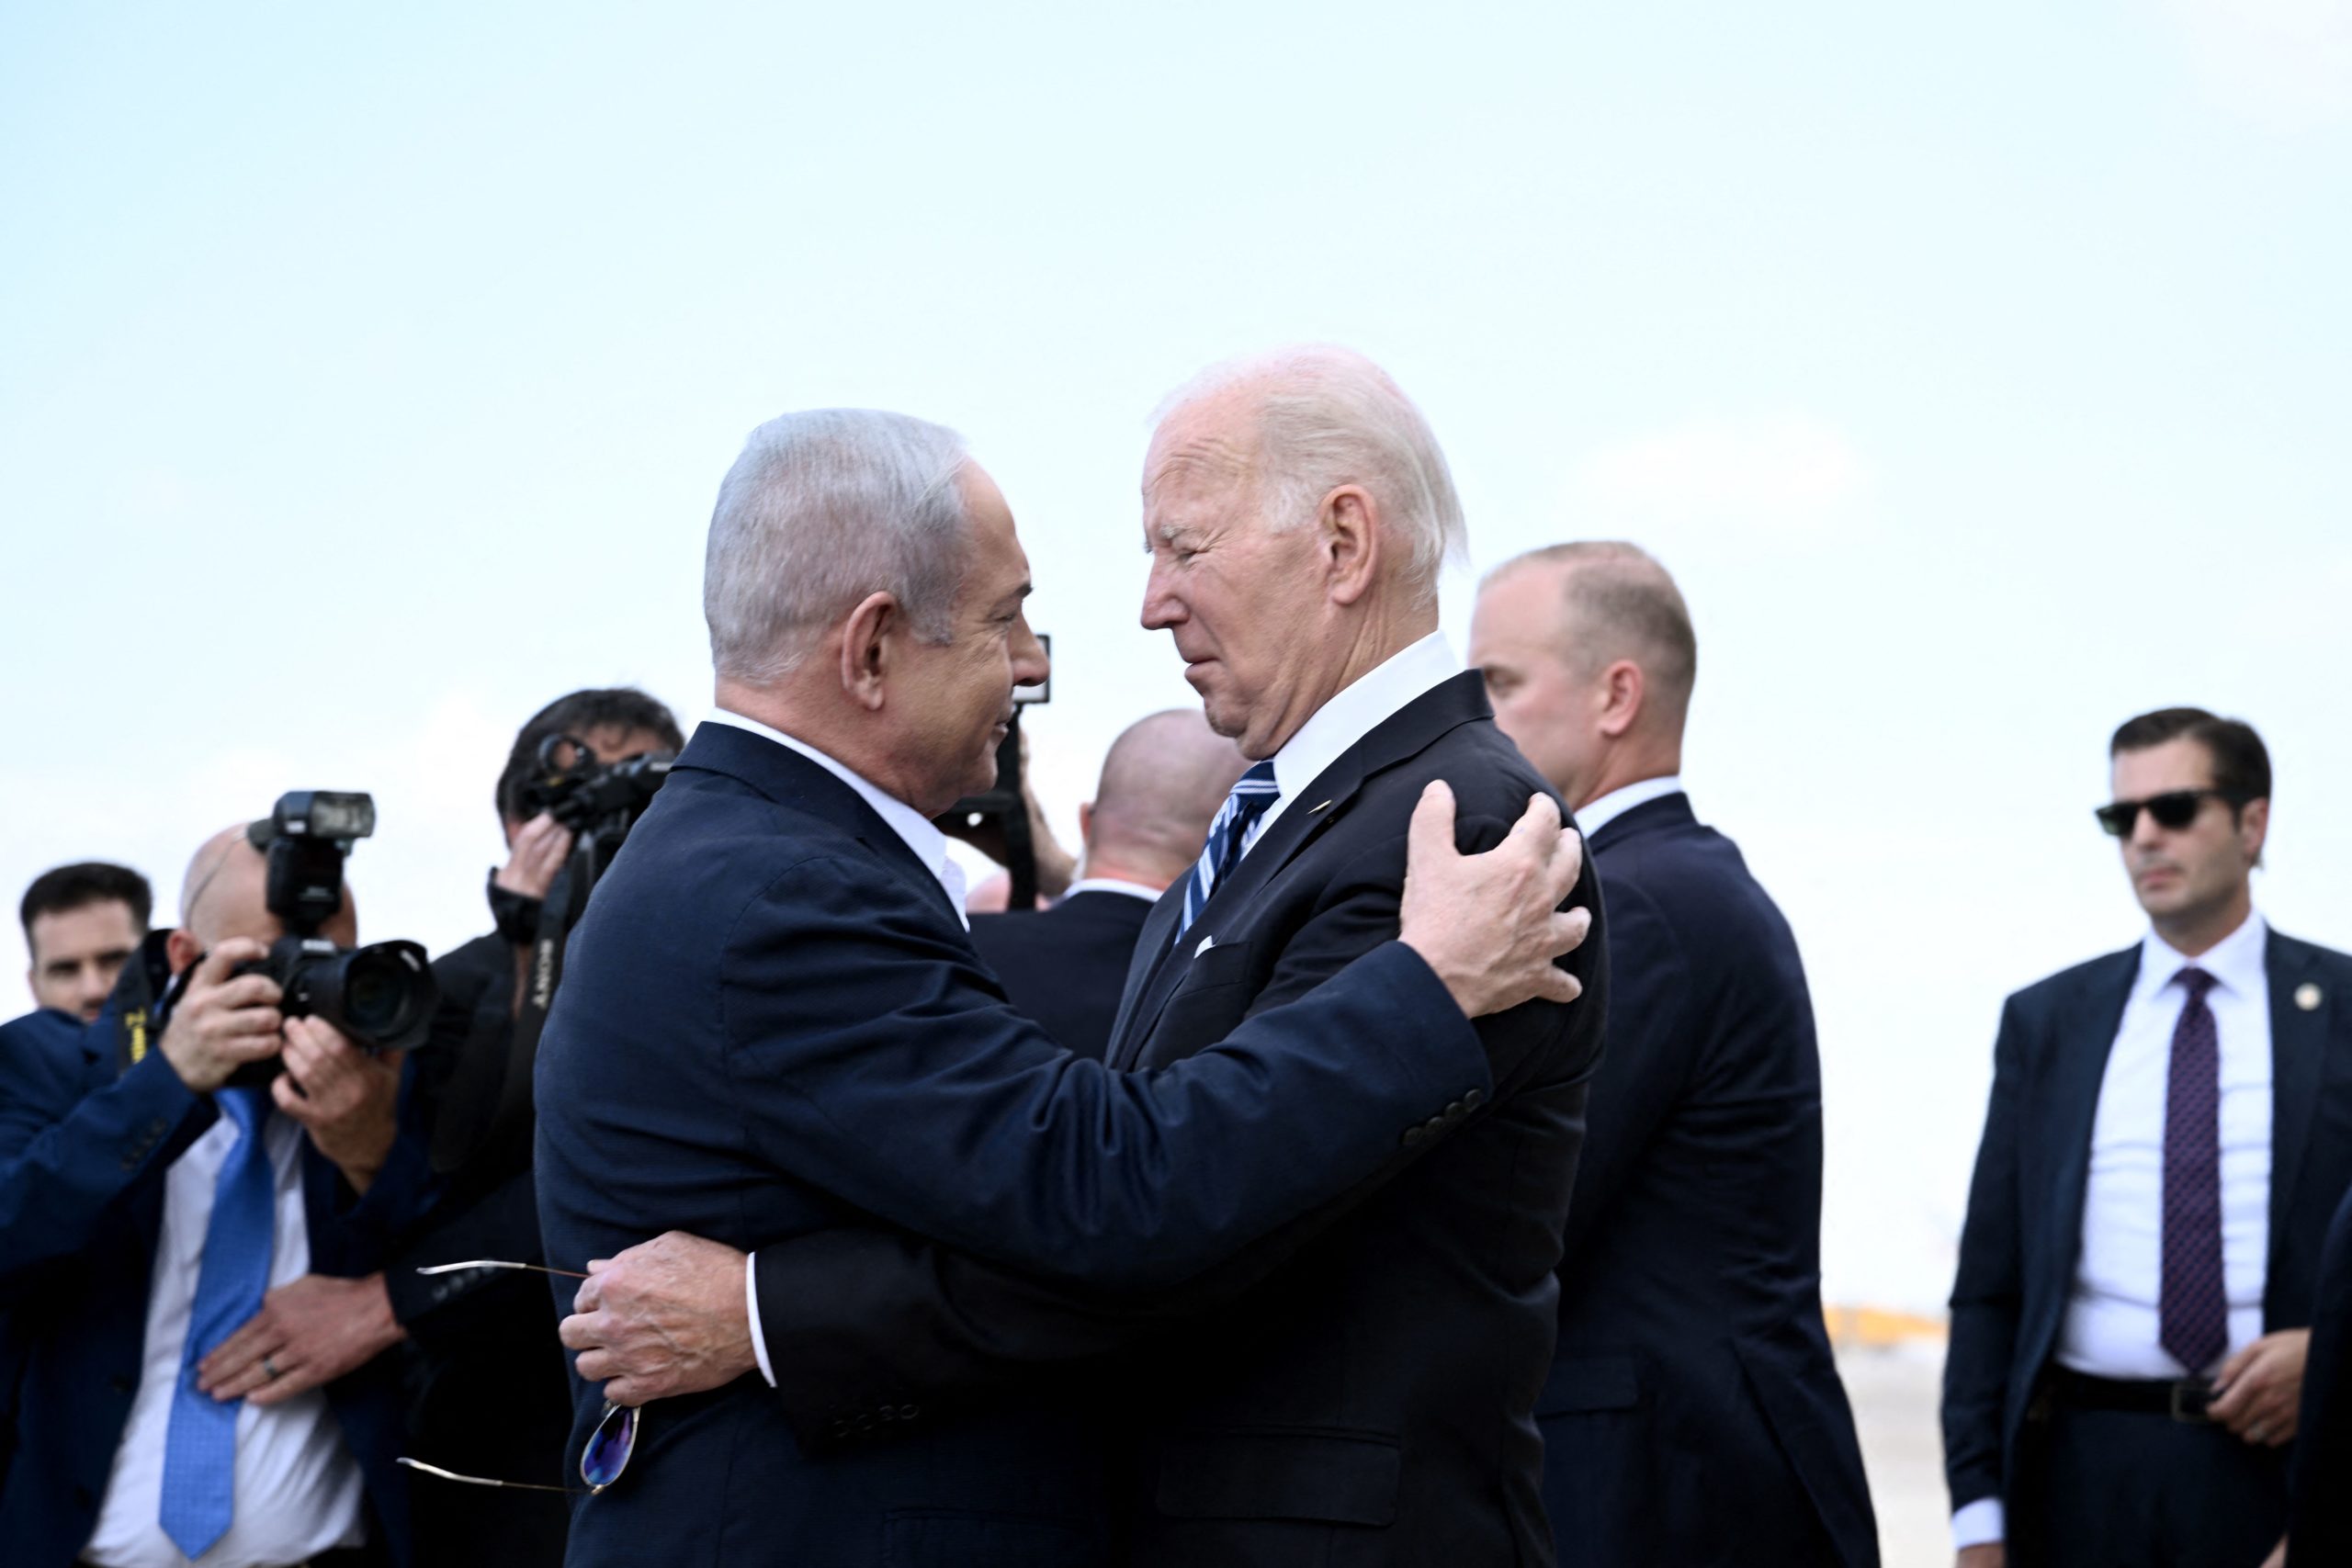 Israel Prime Minister Benjamin Netanyahu (L) greets US President Joe Biden upon his arrival at Tel Aviv's Ben Gurion airport on October 18, 2023, amid the ongoing battles between Israel and the Palestinian group Hamas. Biden landed in Israel on October 18, on a solidarity visit following Hamas attacks that have led to major Israeli reprisals. Thousands of people, both Israeli and Palestinians have died since October 7, 2023, after Palestinian Hamas militants based in the Gaza Strip, entered southern Israel in a surprise attack leading Israel to declare war on Hamas in Gaza on October 8. (Photo by Brendan SMIALOWSKI / AFP) (Photo by BRENDAN SMIALOWSKI/AFP via Getty Images)